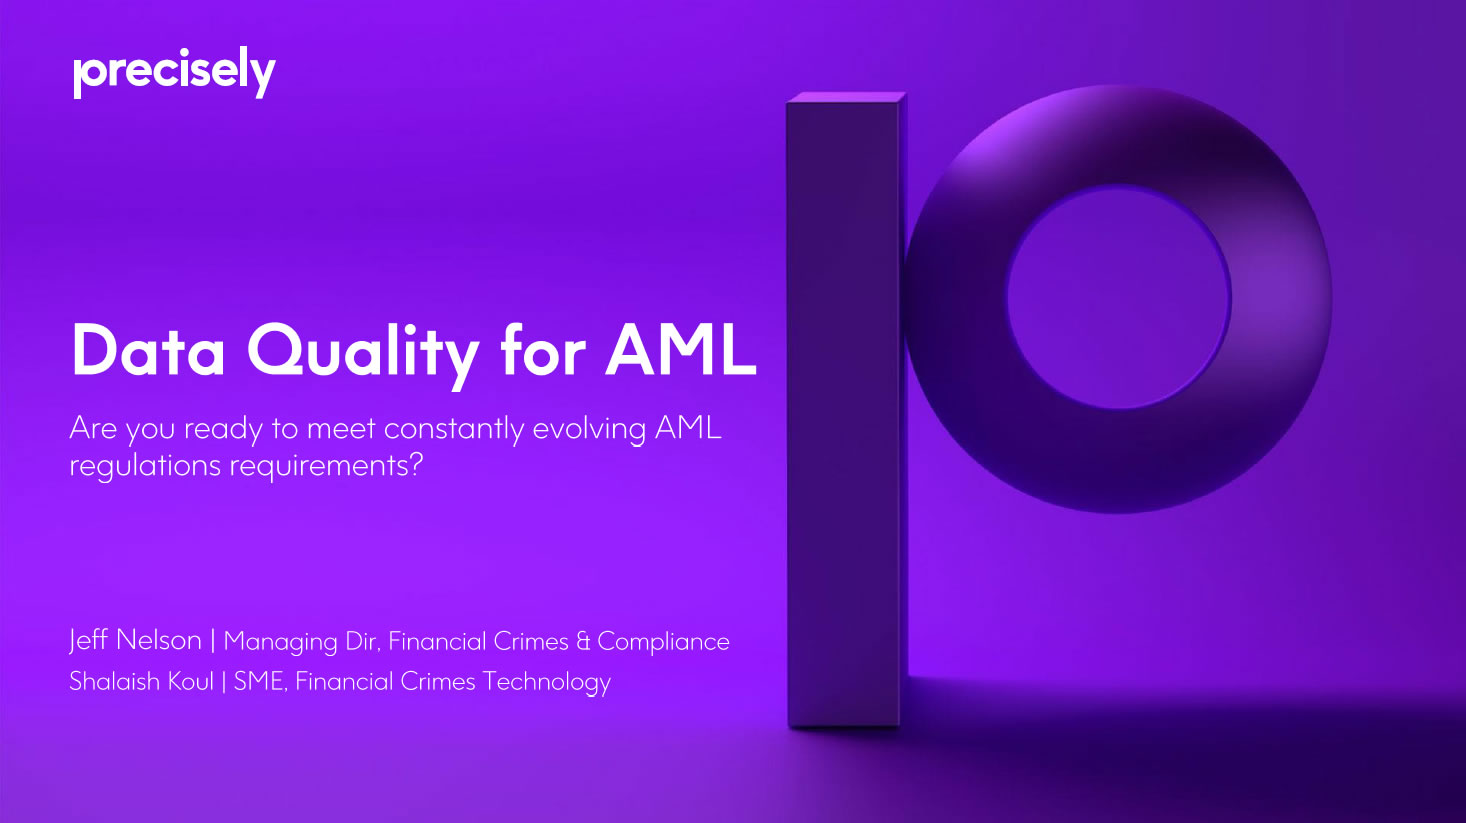 Data Quality for AML Webcast